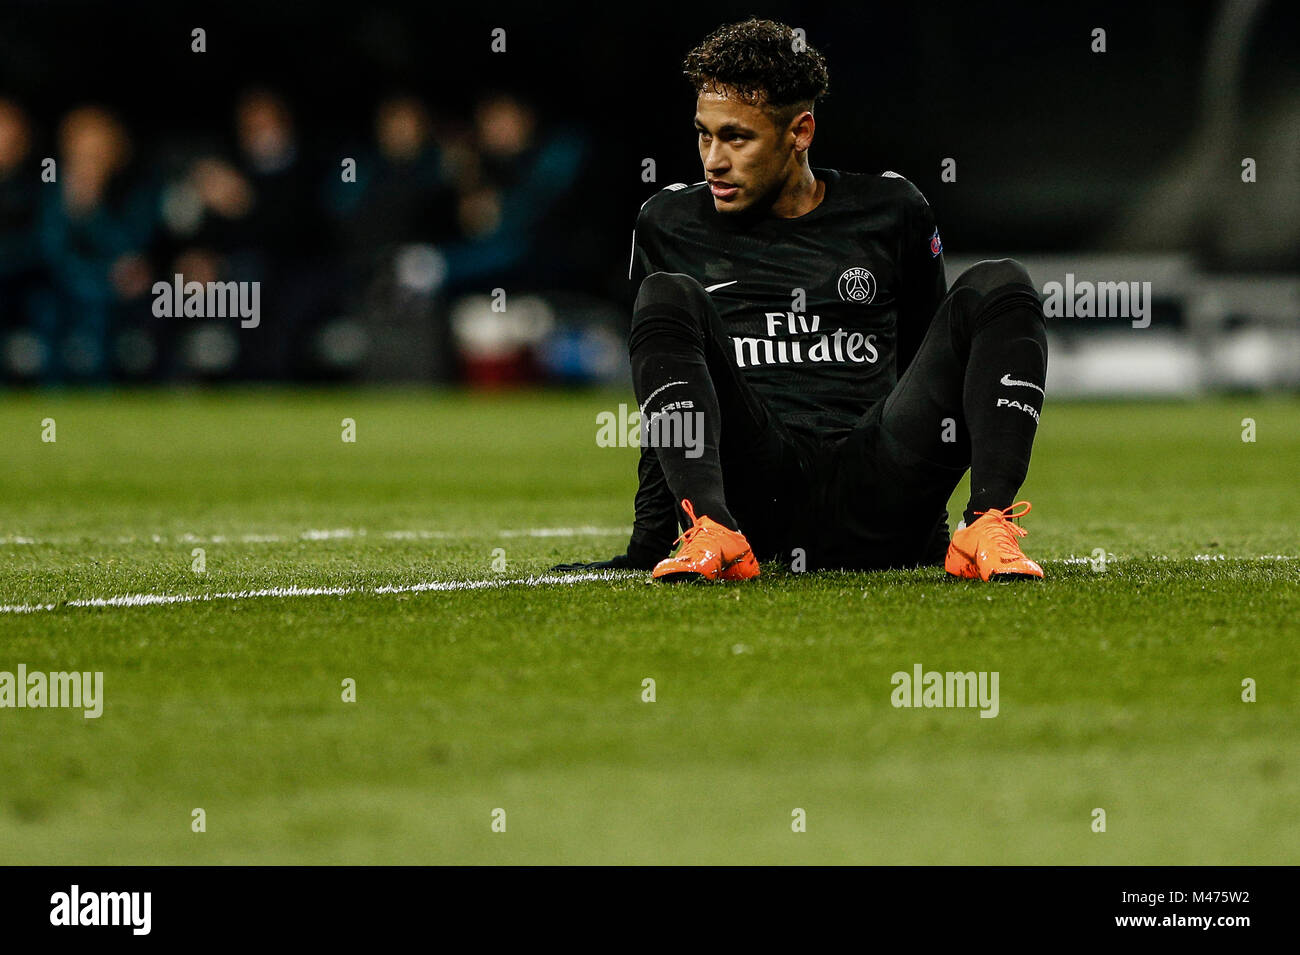 Madrid, Spain, February 14, 2018. Neymar (PSG) frustrated as he missed a  good goal scoring chance UCL Champions League match between Real Madrid vs  PSG at the Santiago Bernabeu stadium in Madrid,